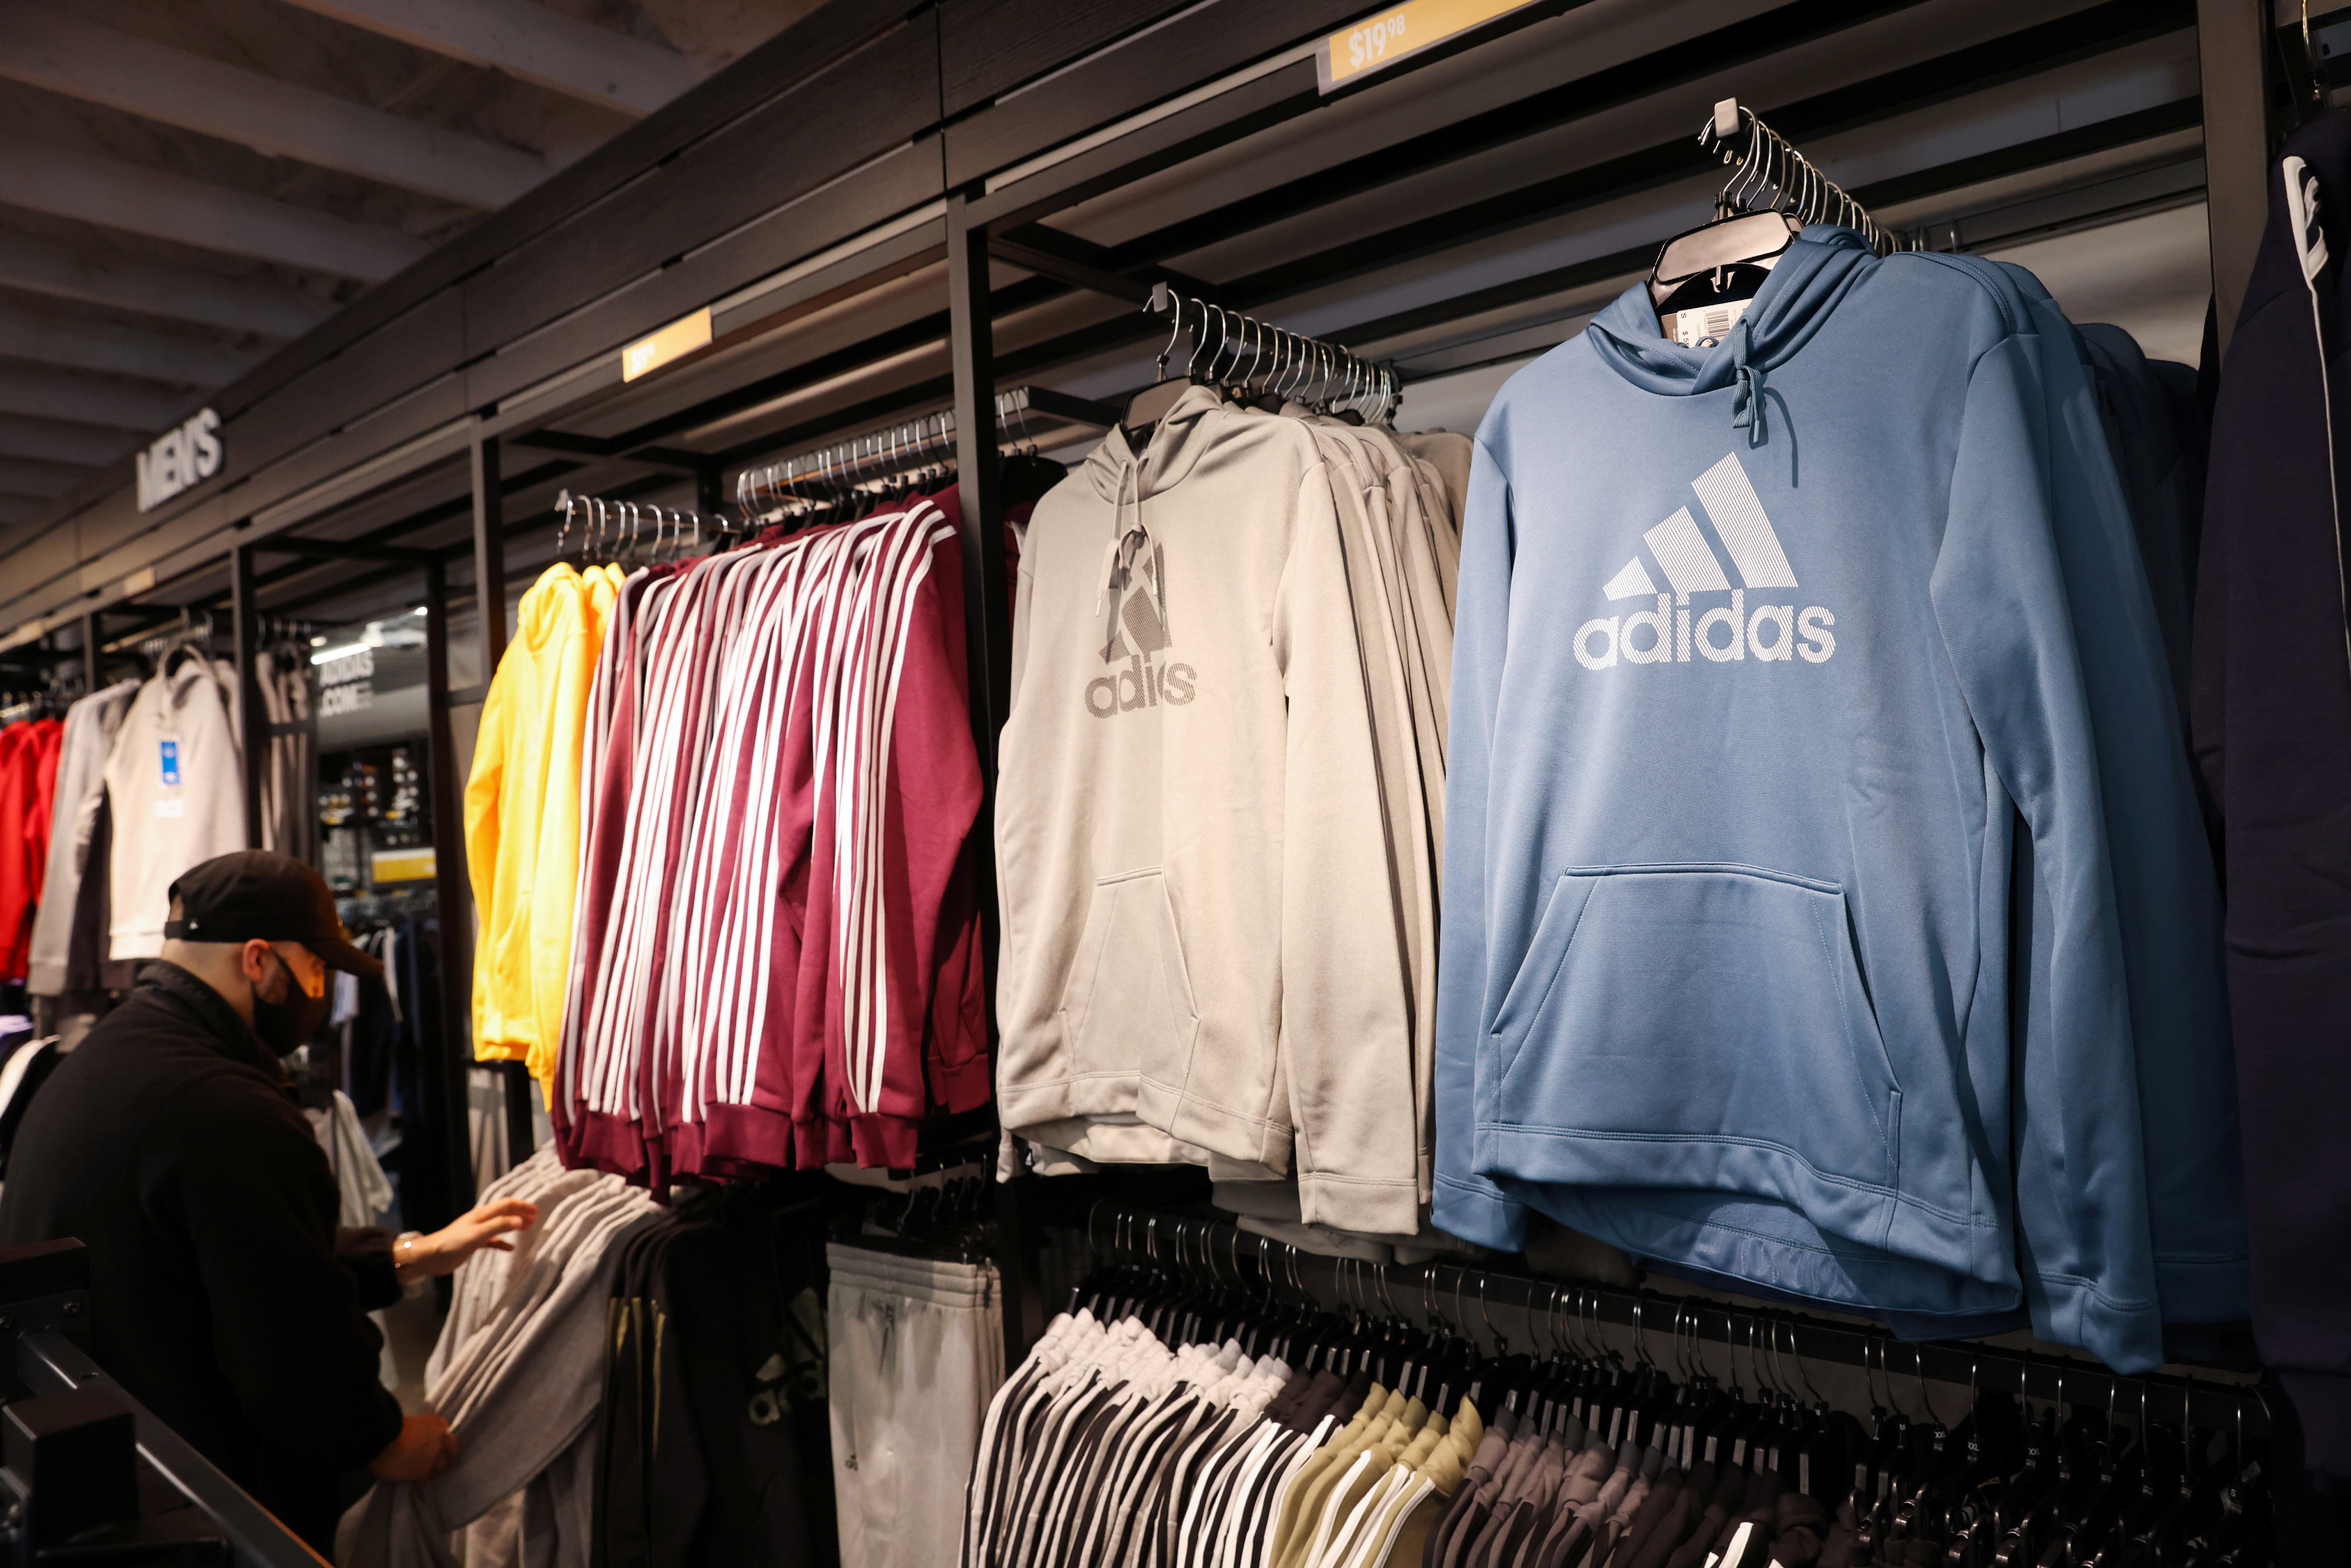 Adidas Outlet Store Gets Even Hotter with These Sexy Photos